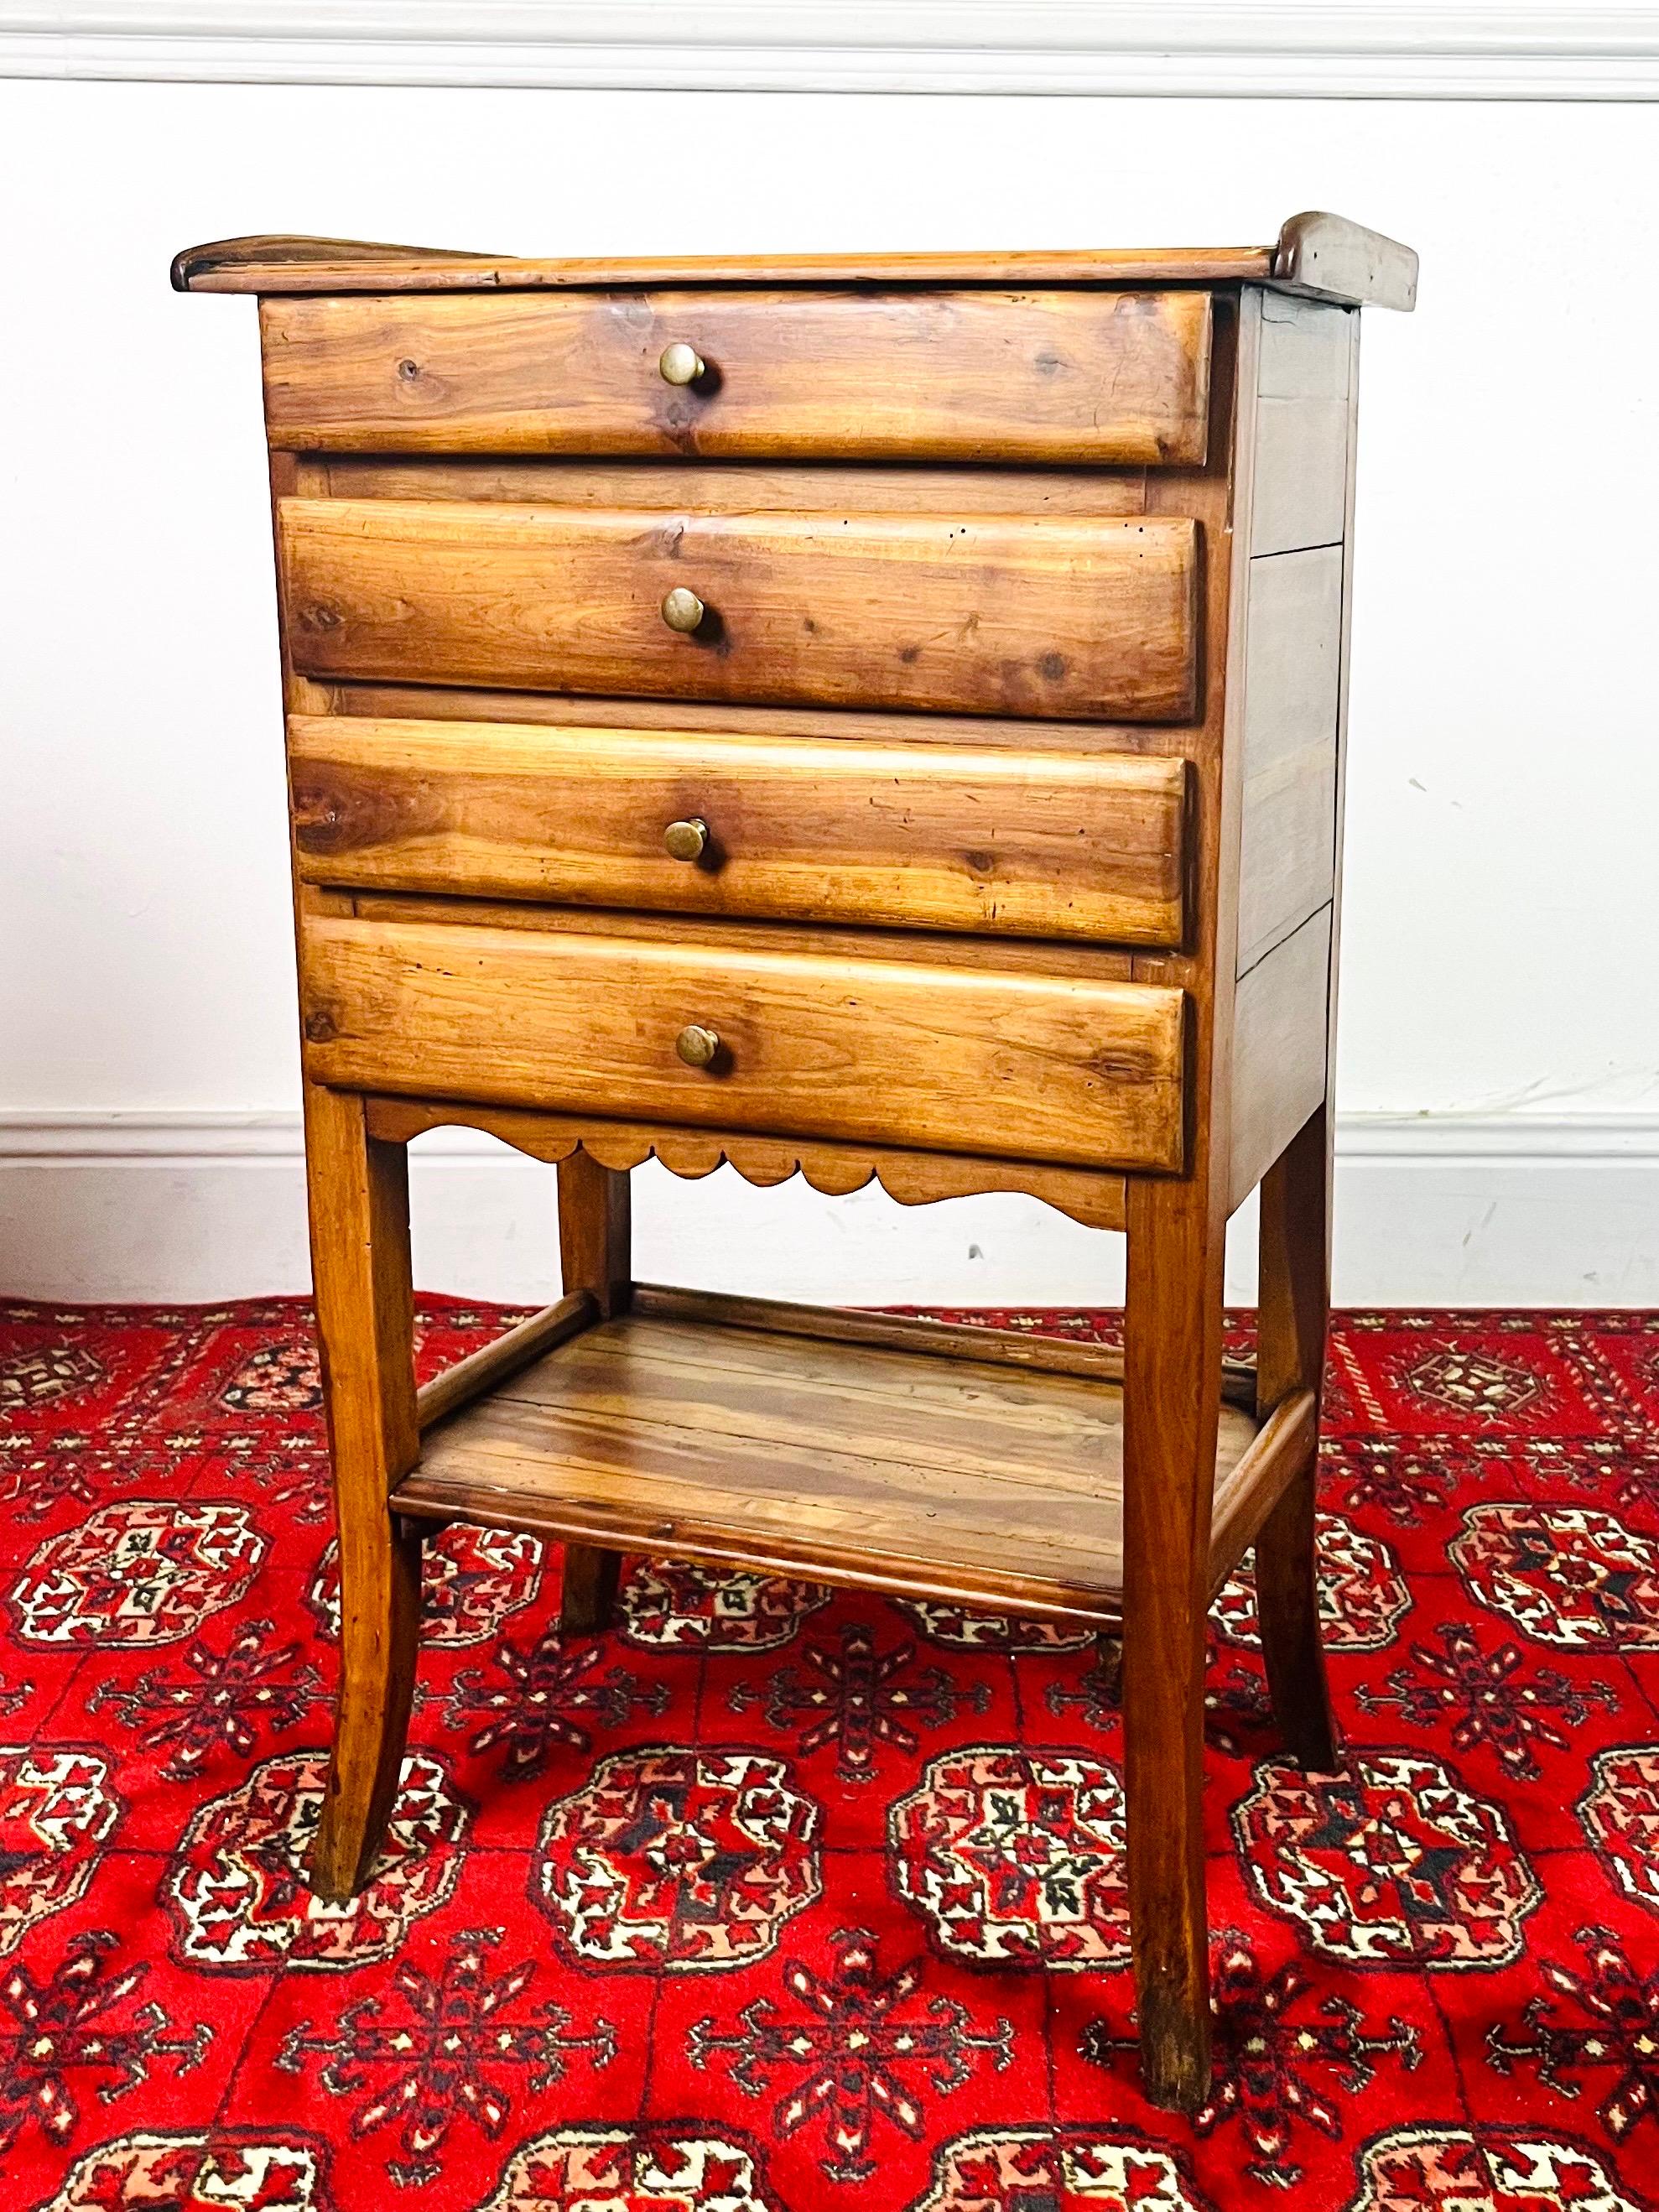 Very pretty bedside table or chest of drawers opening with 4 drawers and featuring a spacer shelf in natural walnut wood from the 19th century.
The feet are covered to add a touch of roundness and elegance.
This adorable little table is Transition